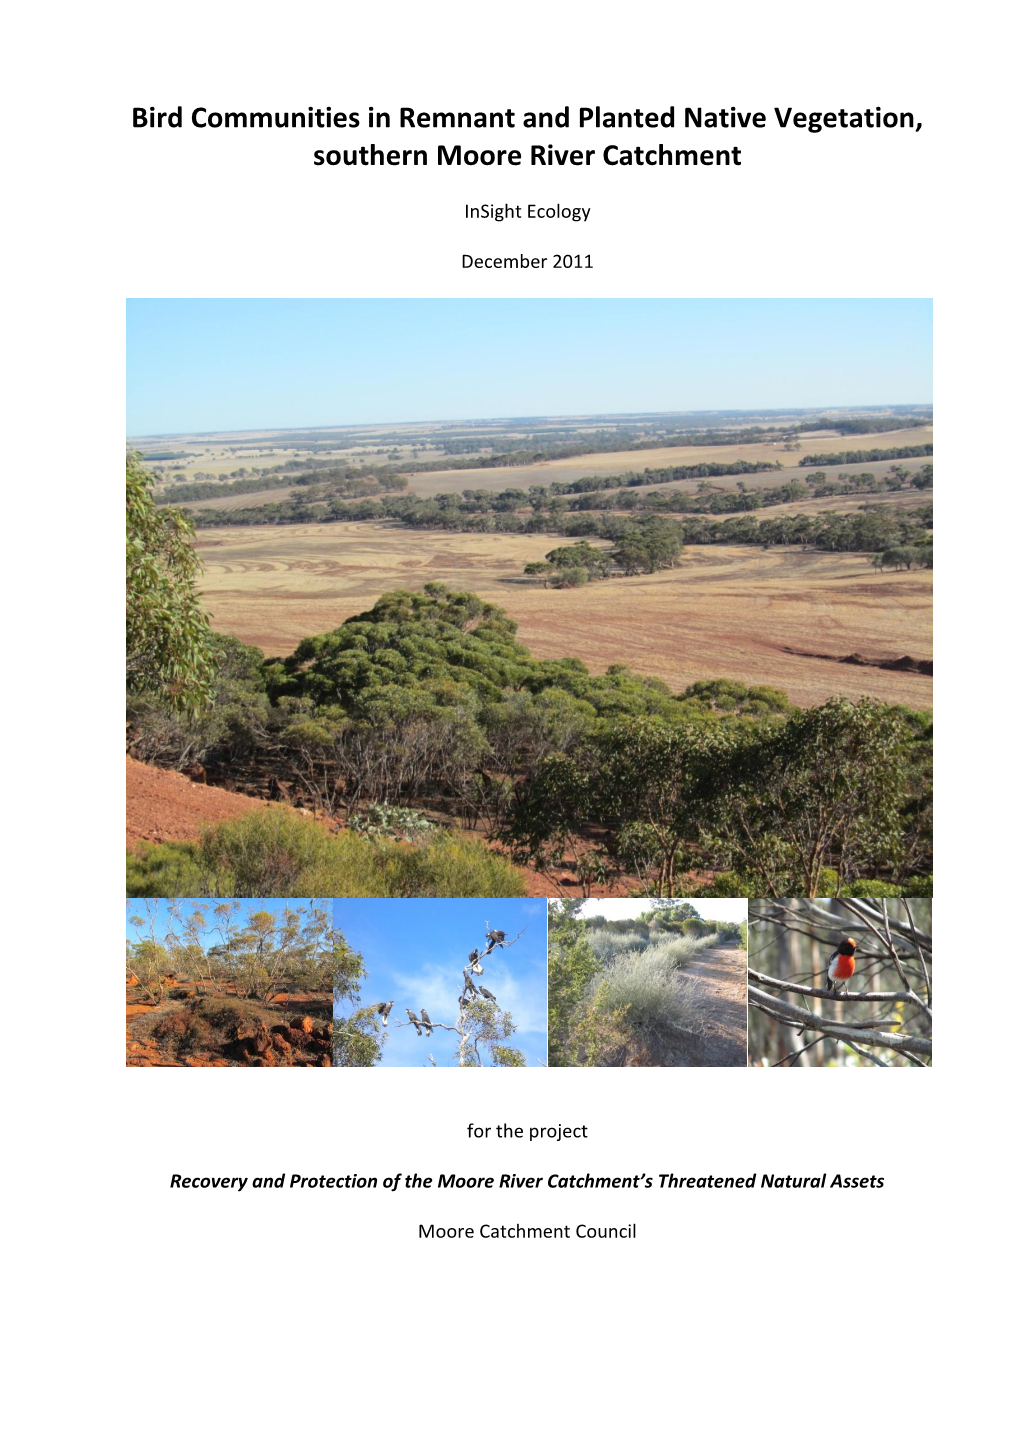 Bird Communities in Remnant and Planted Native Vegetation in MCC Dec 2011